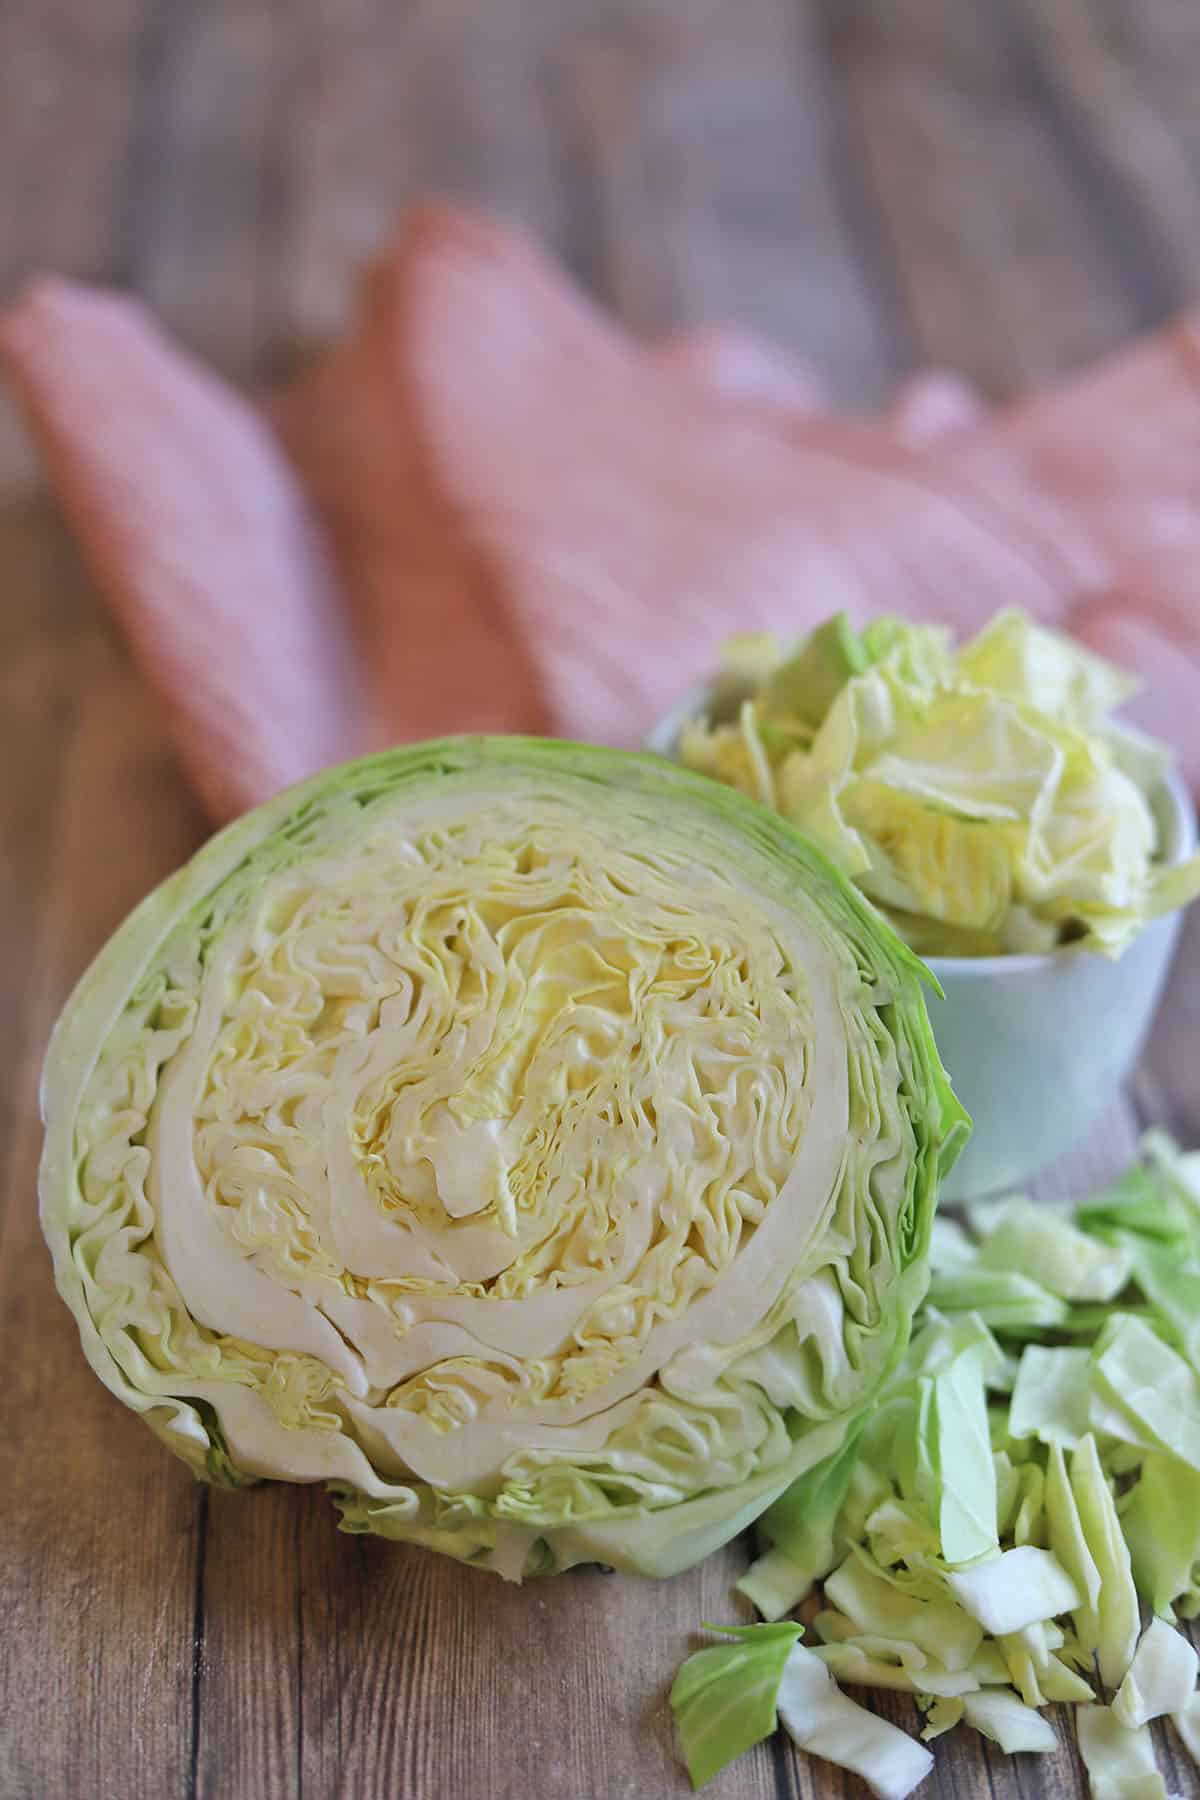 Cabbage head cut in half by chopped cabbage pieces.